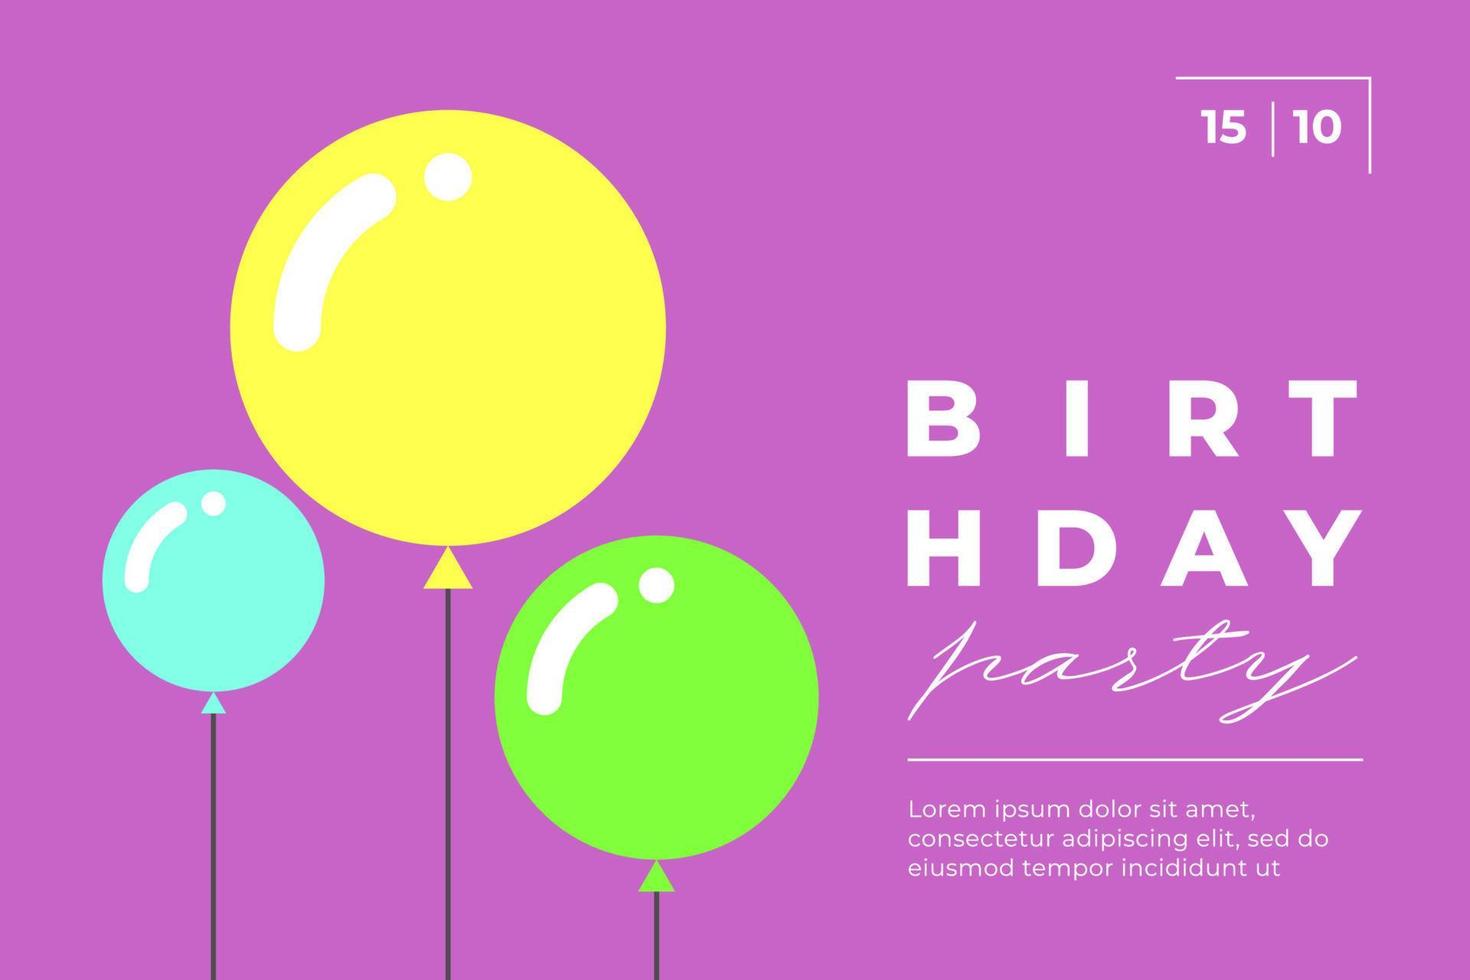 Birthday party greeting minimal trendy horizontal invitation poster. Celebration event minimalistic creative design card with balloons. Happy holiday simple flat vector eps placard